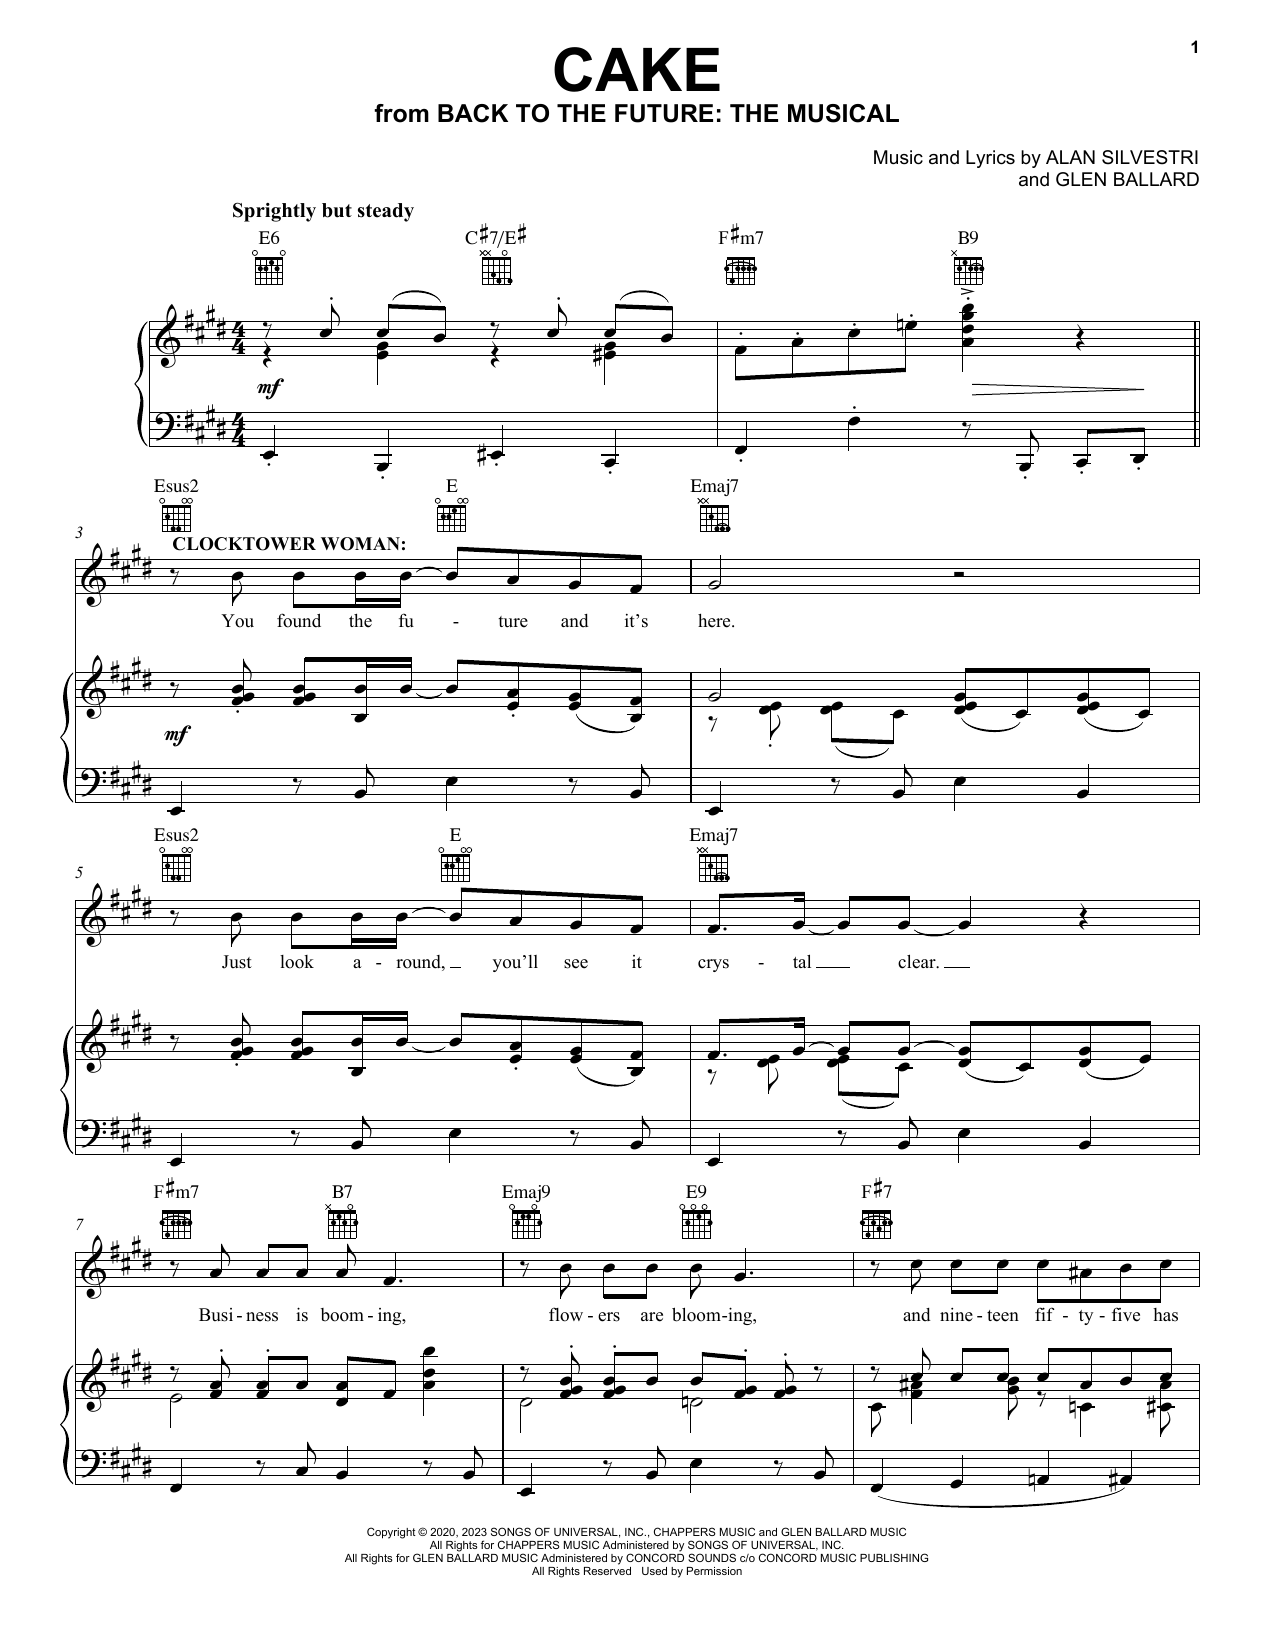 Download Glen Ballard and Alan Silvestri Cake (from Back To The Future: The Musi Sheet Music